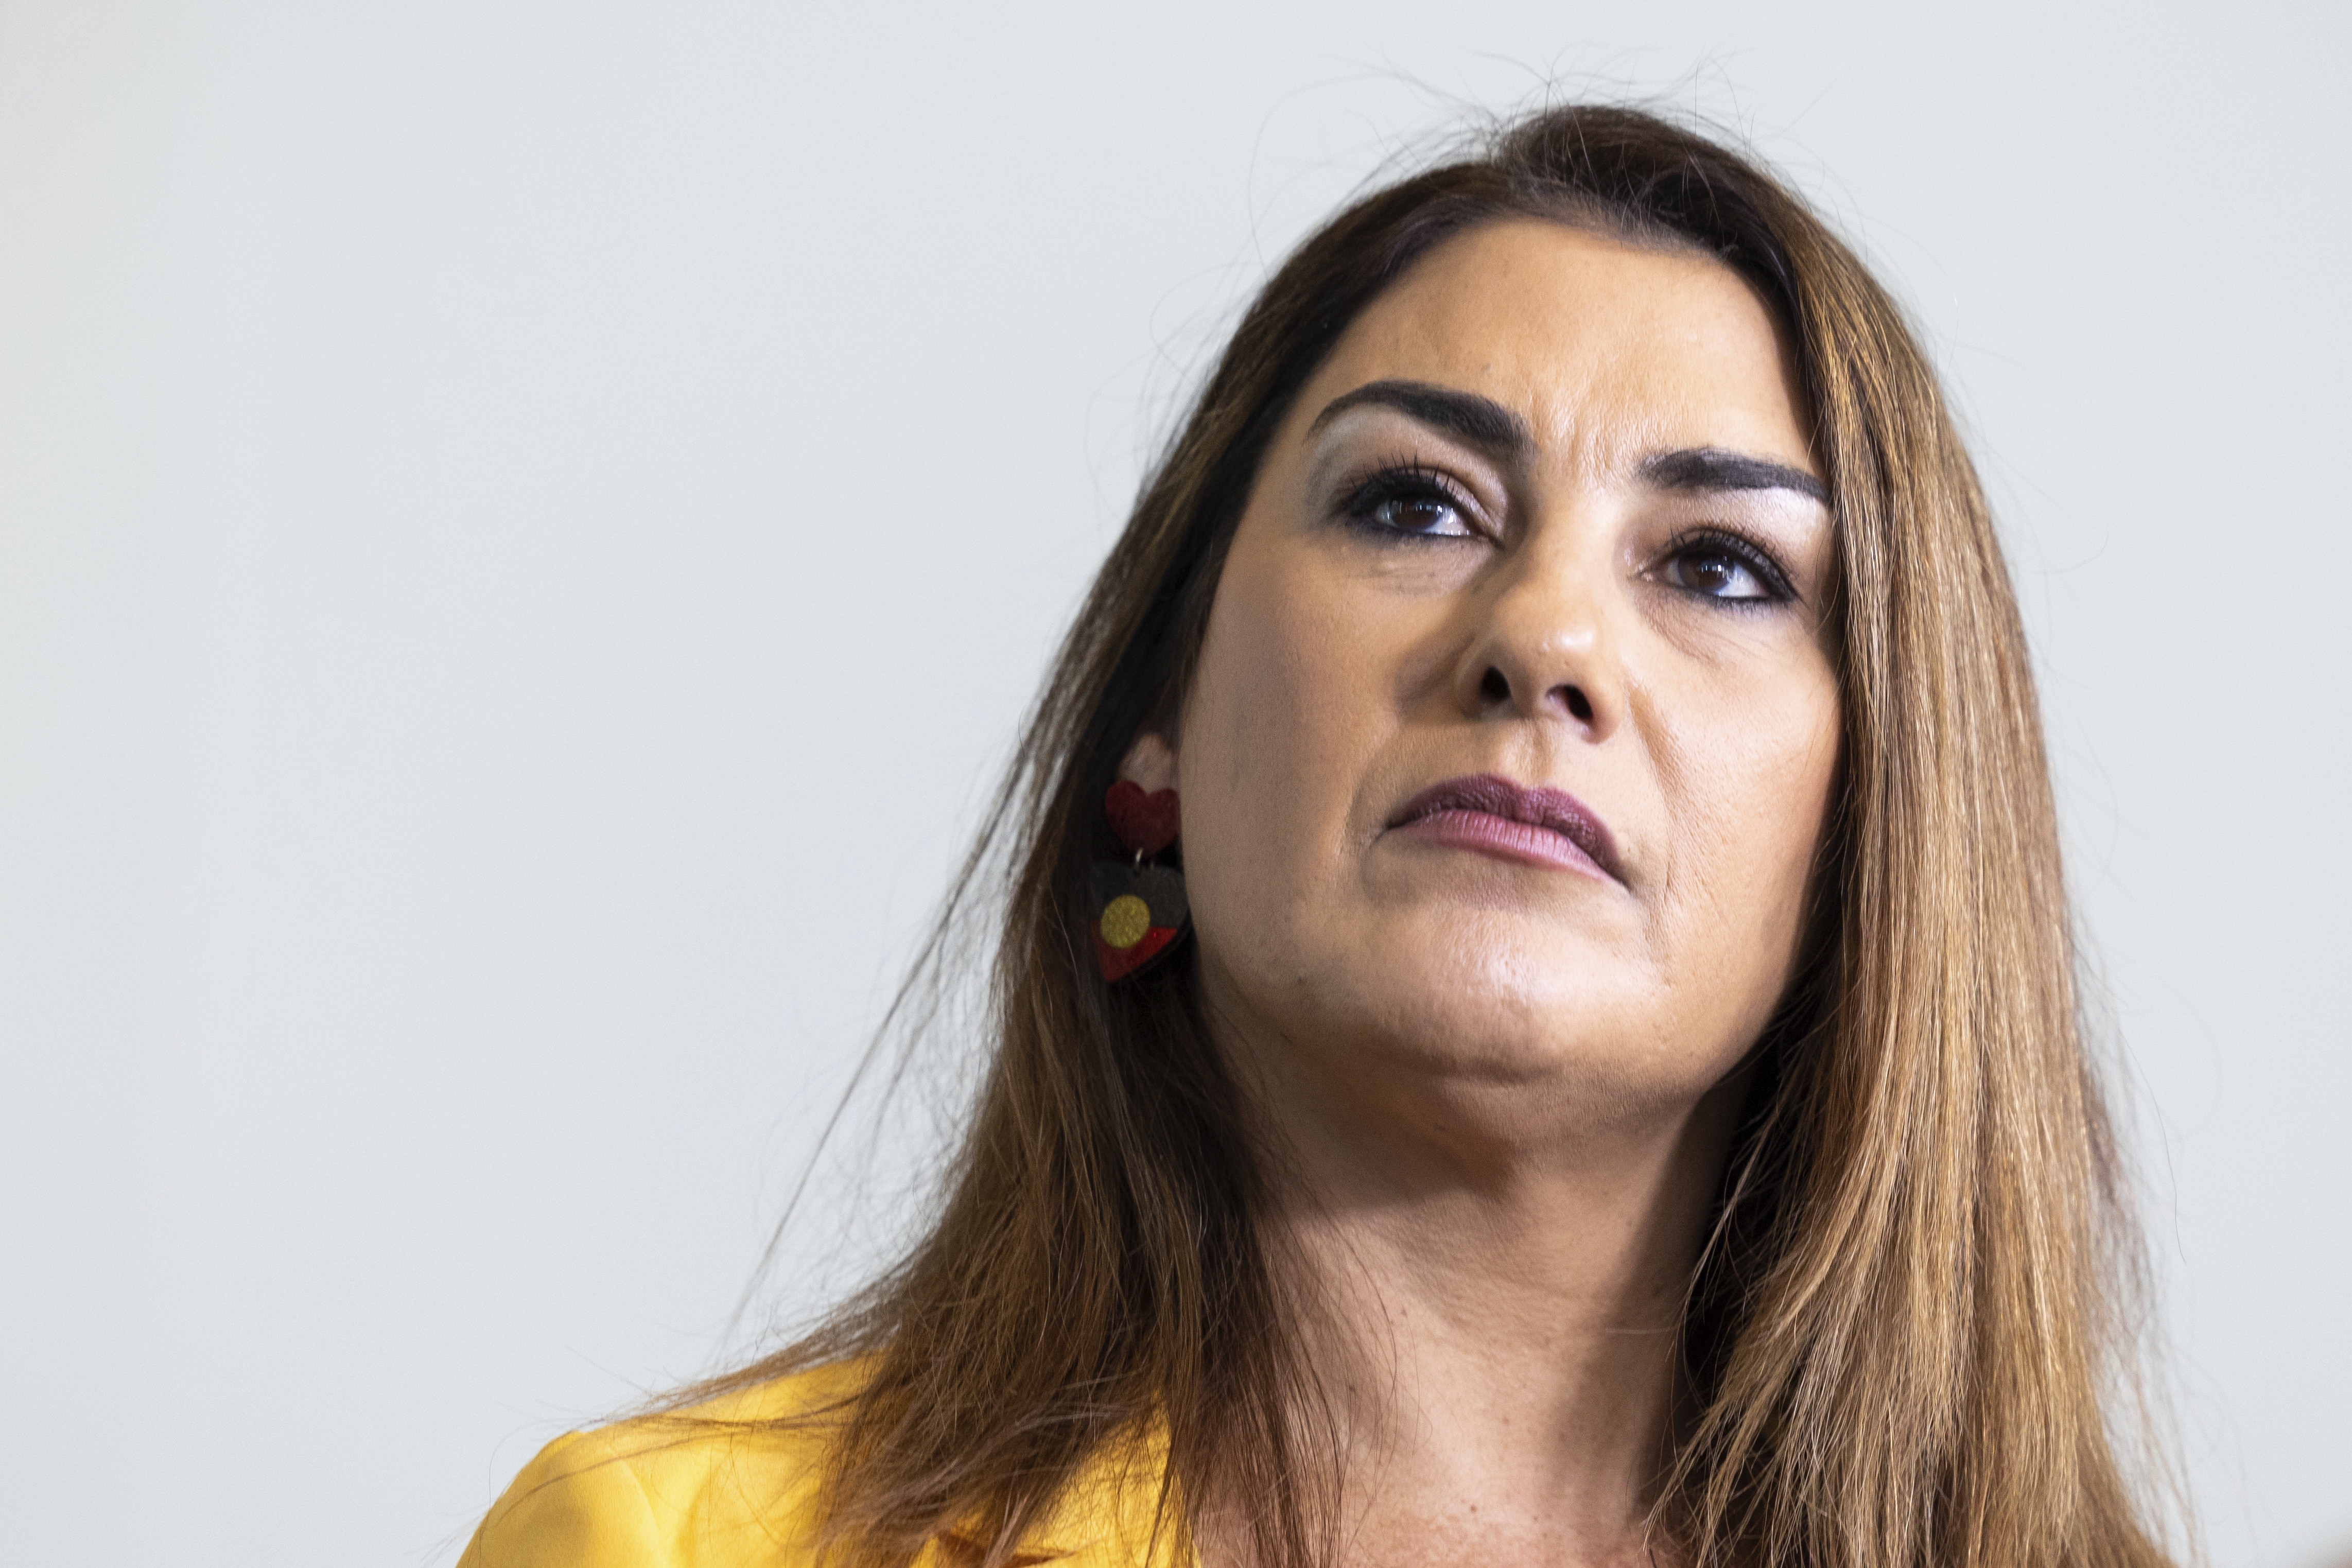 Independent Senator Lidia Thorpe has identified herself as the federal MP who was the target of alleged threats in an online video last year.